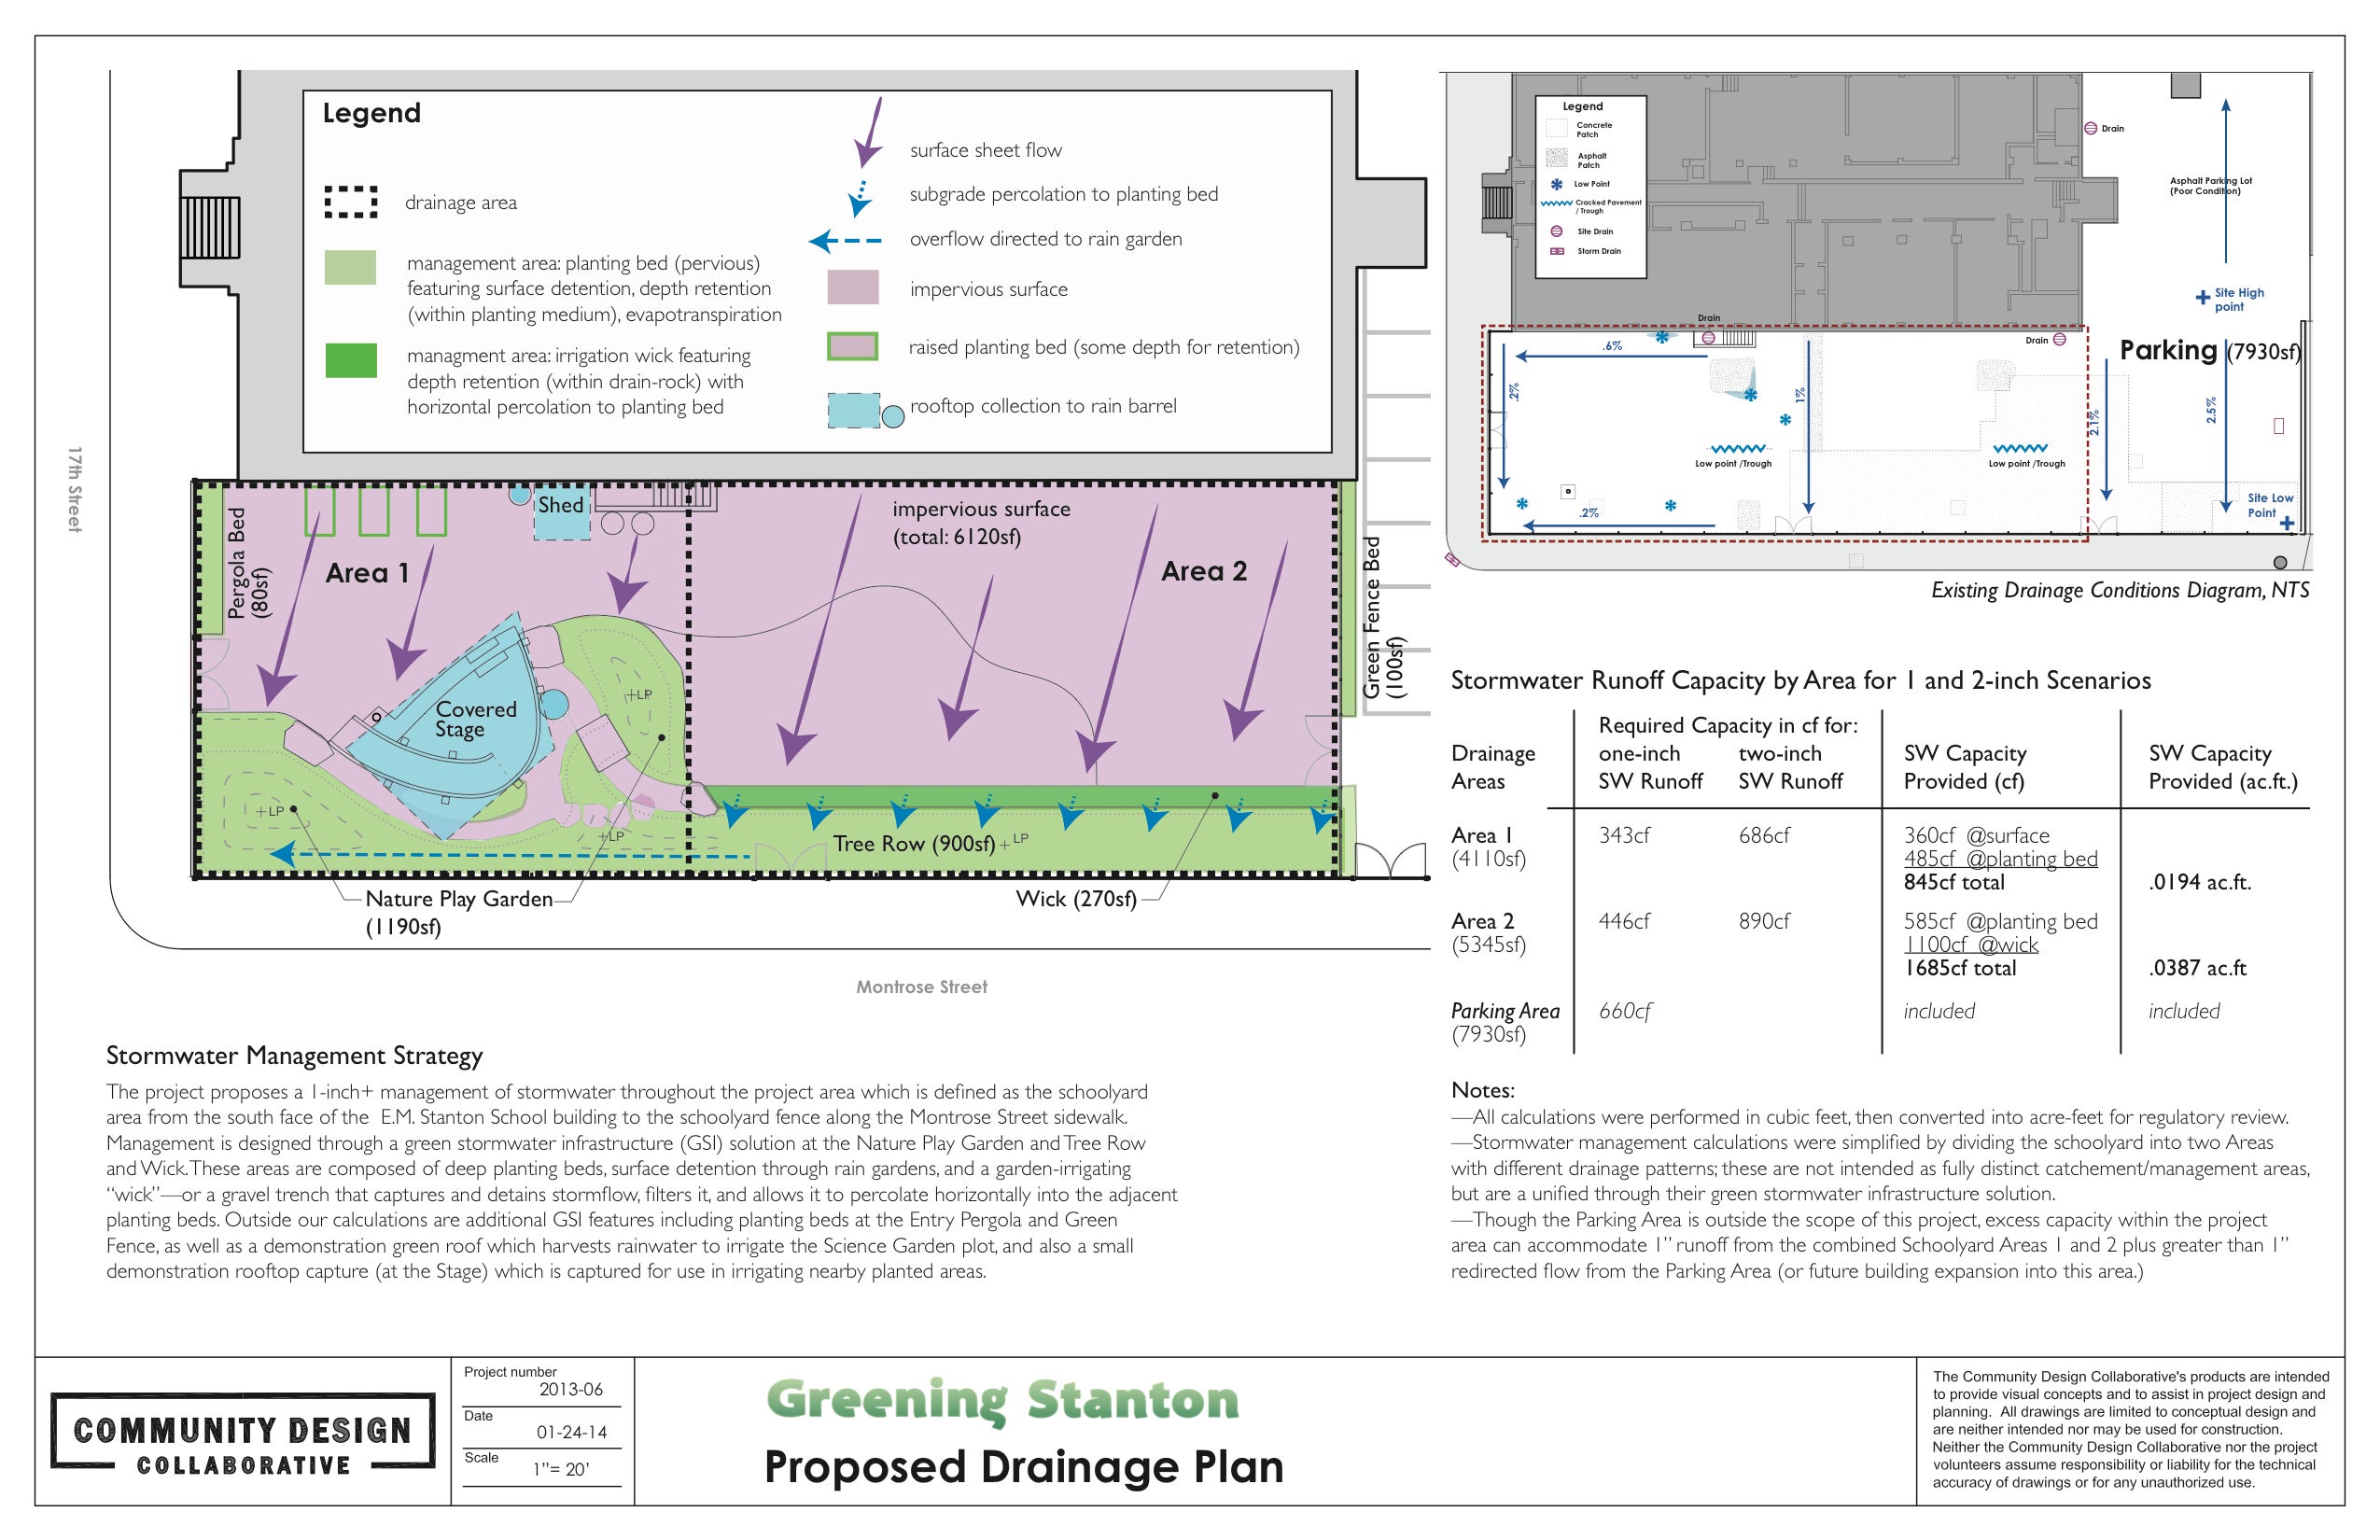 Greening Stanton stormwater management plan, Courtesy of the Community Design Collaborative